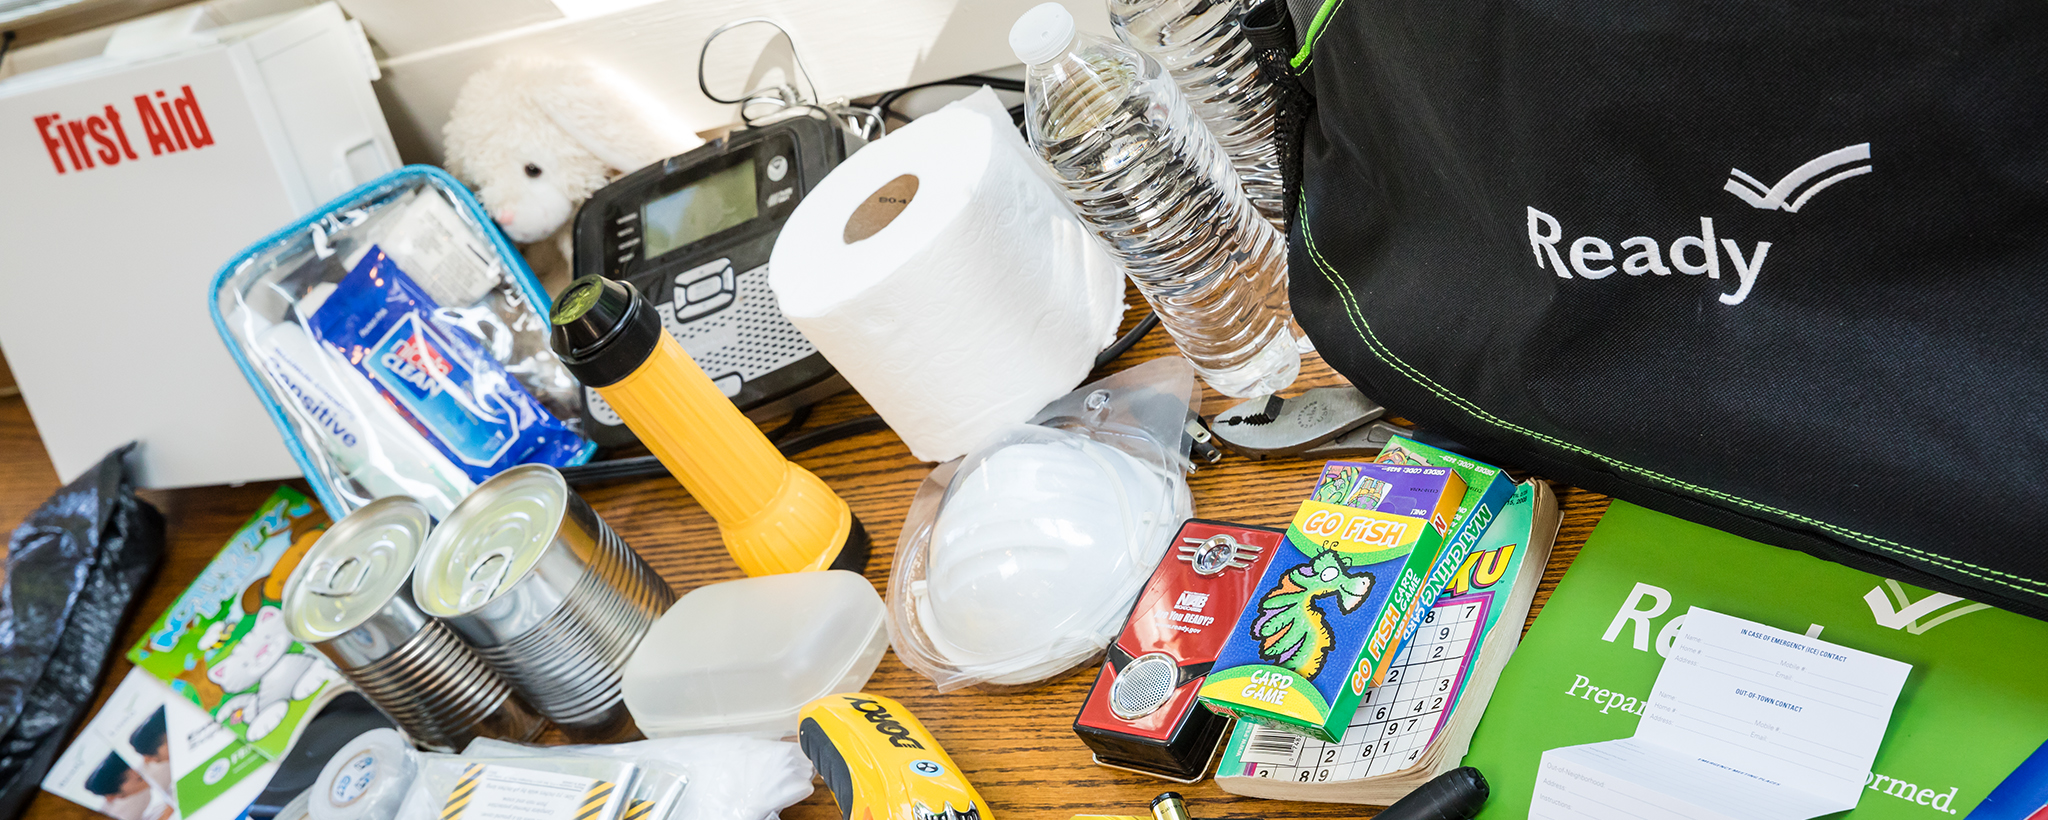 Essential Items to Purchase to Prepare for Power Outages - Plan for Awesome